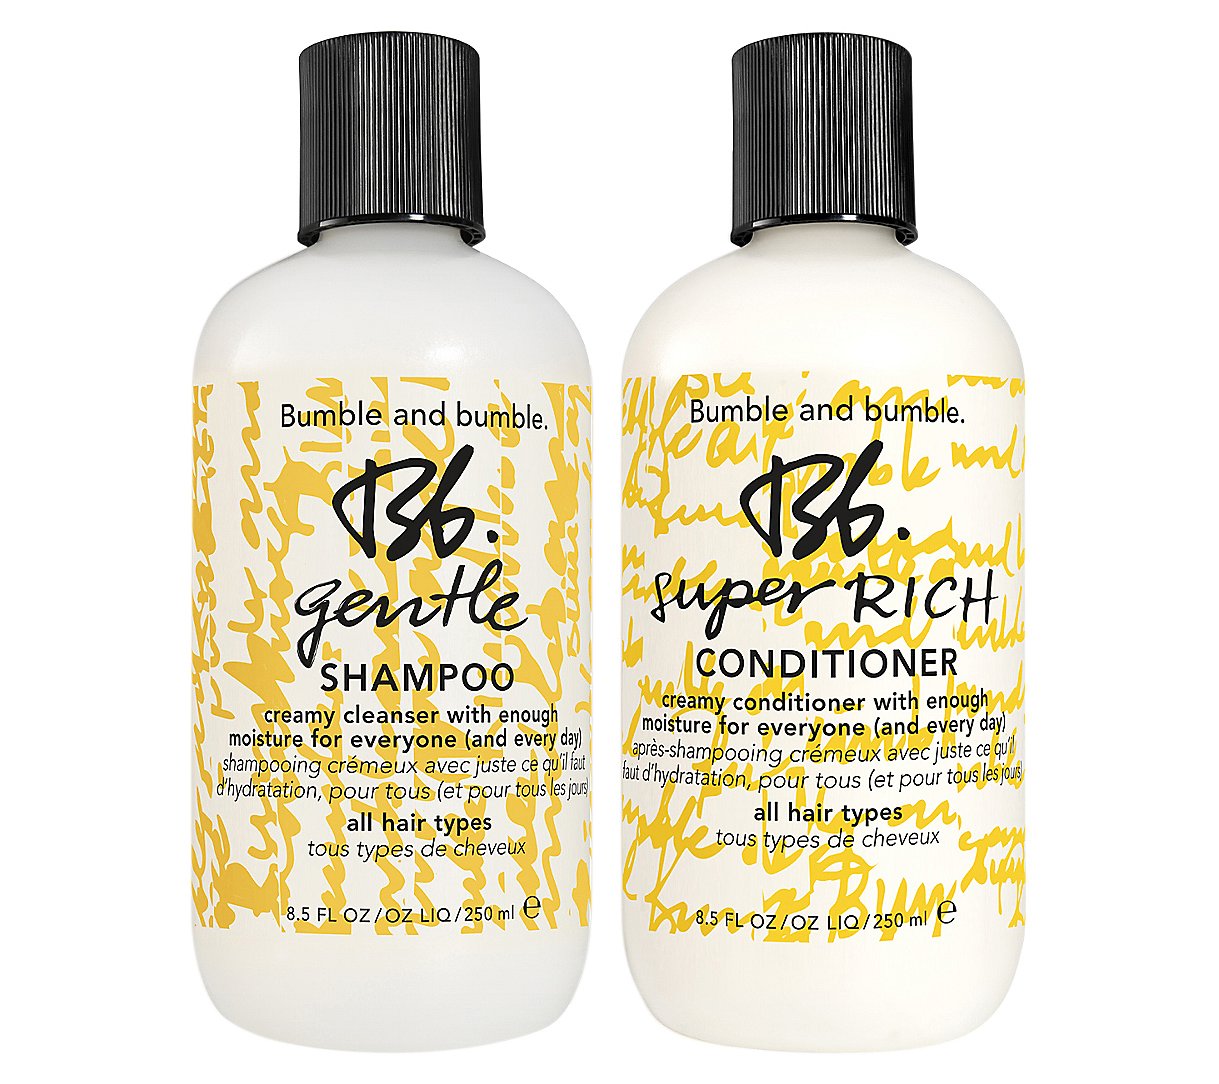 Bumble and bumble. Gentle + Super Rich Cleansin g Set